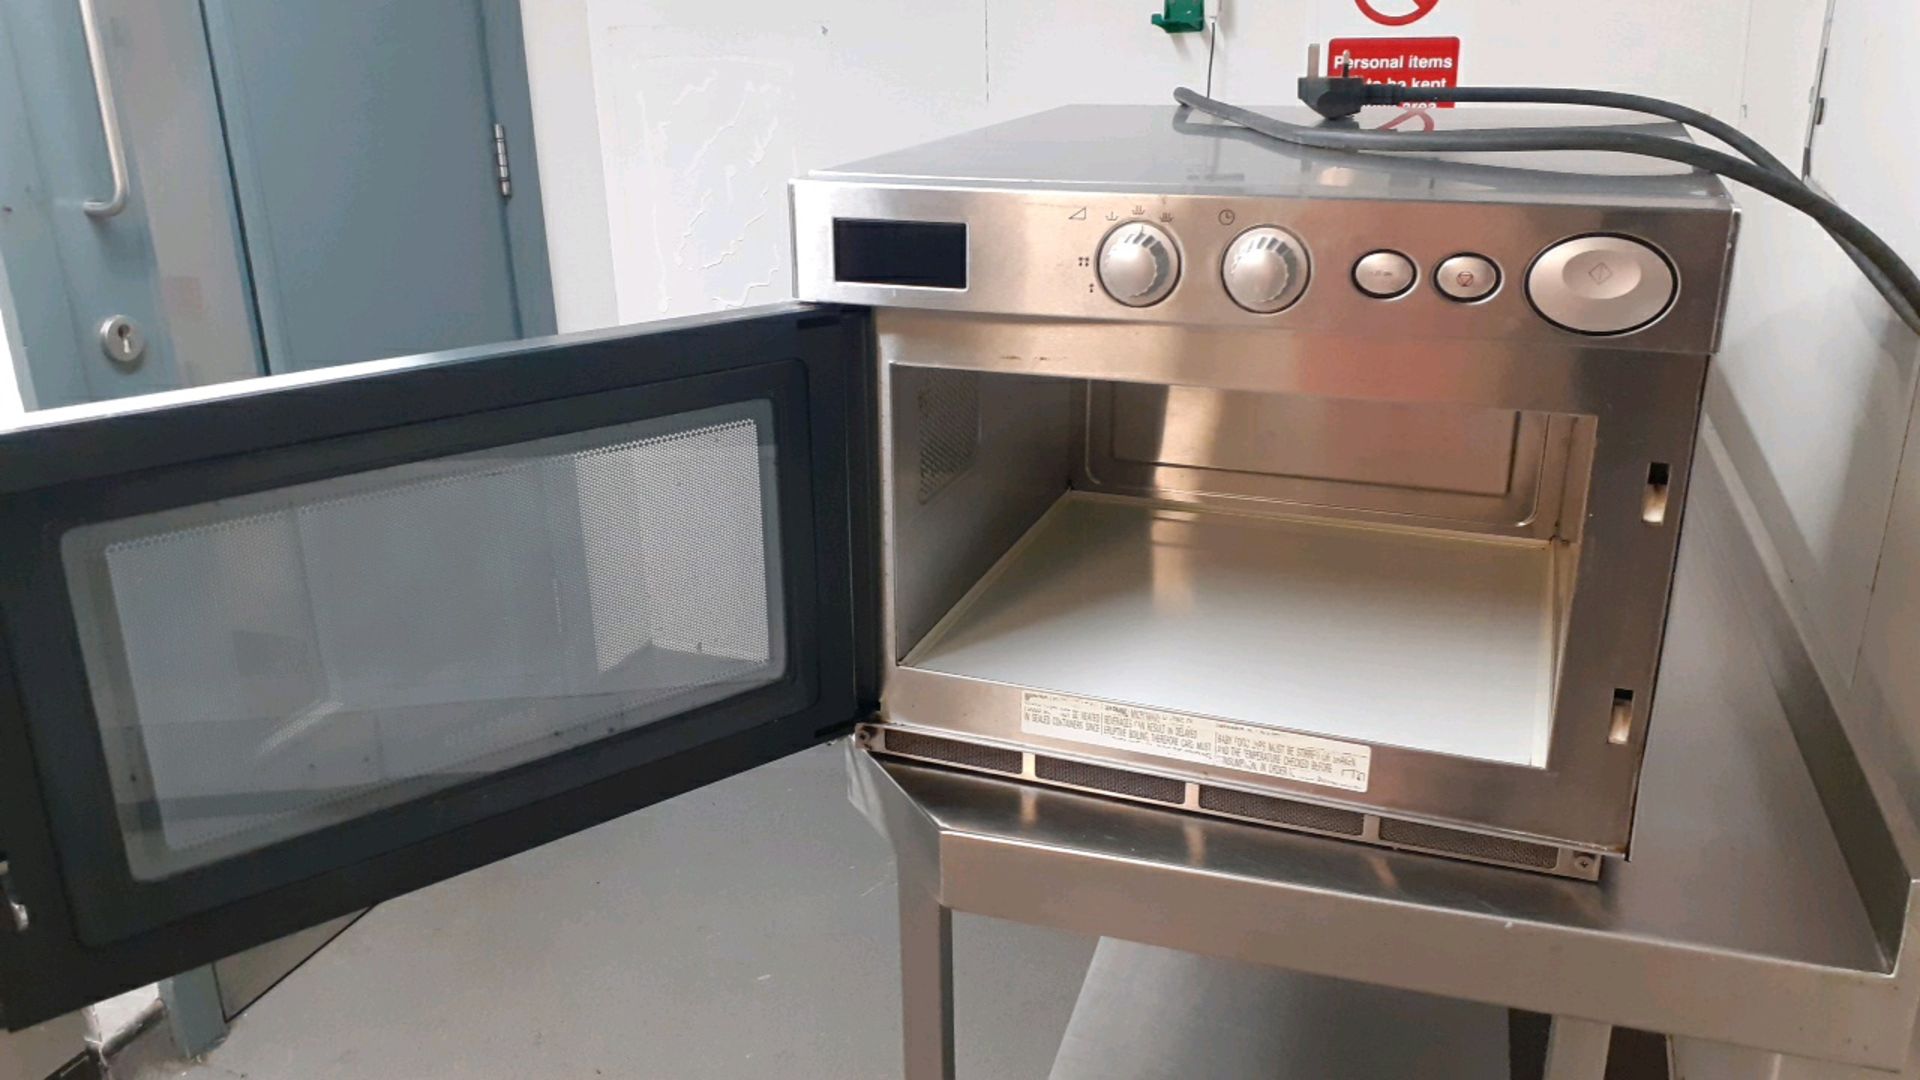 Microwave oven - Image 2 of 3